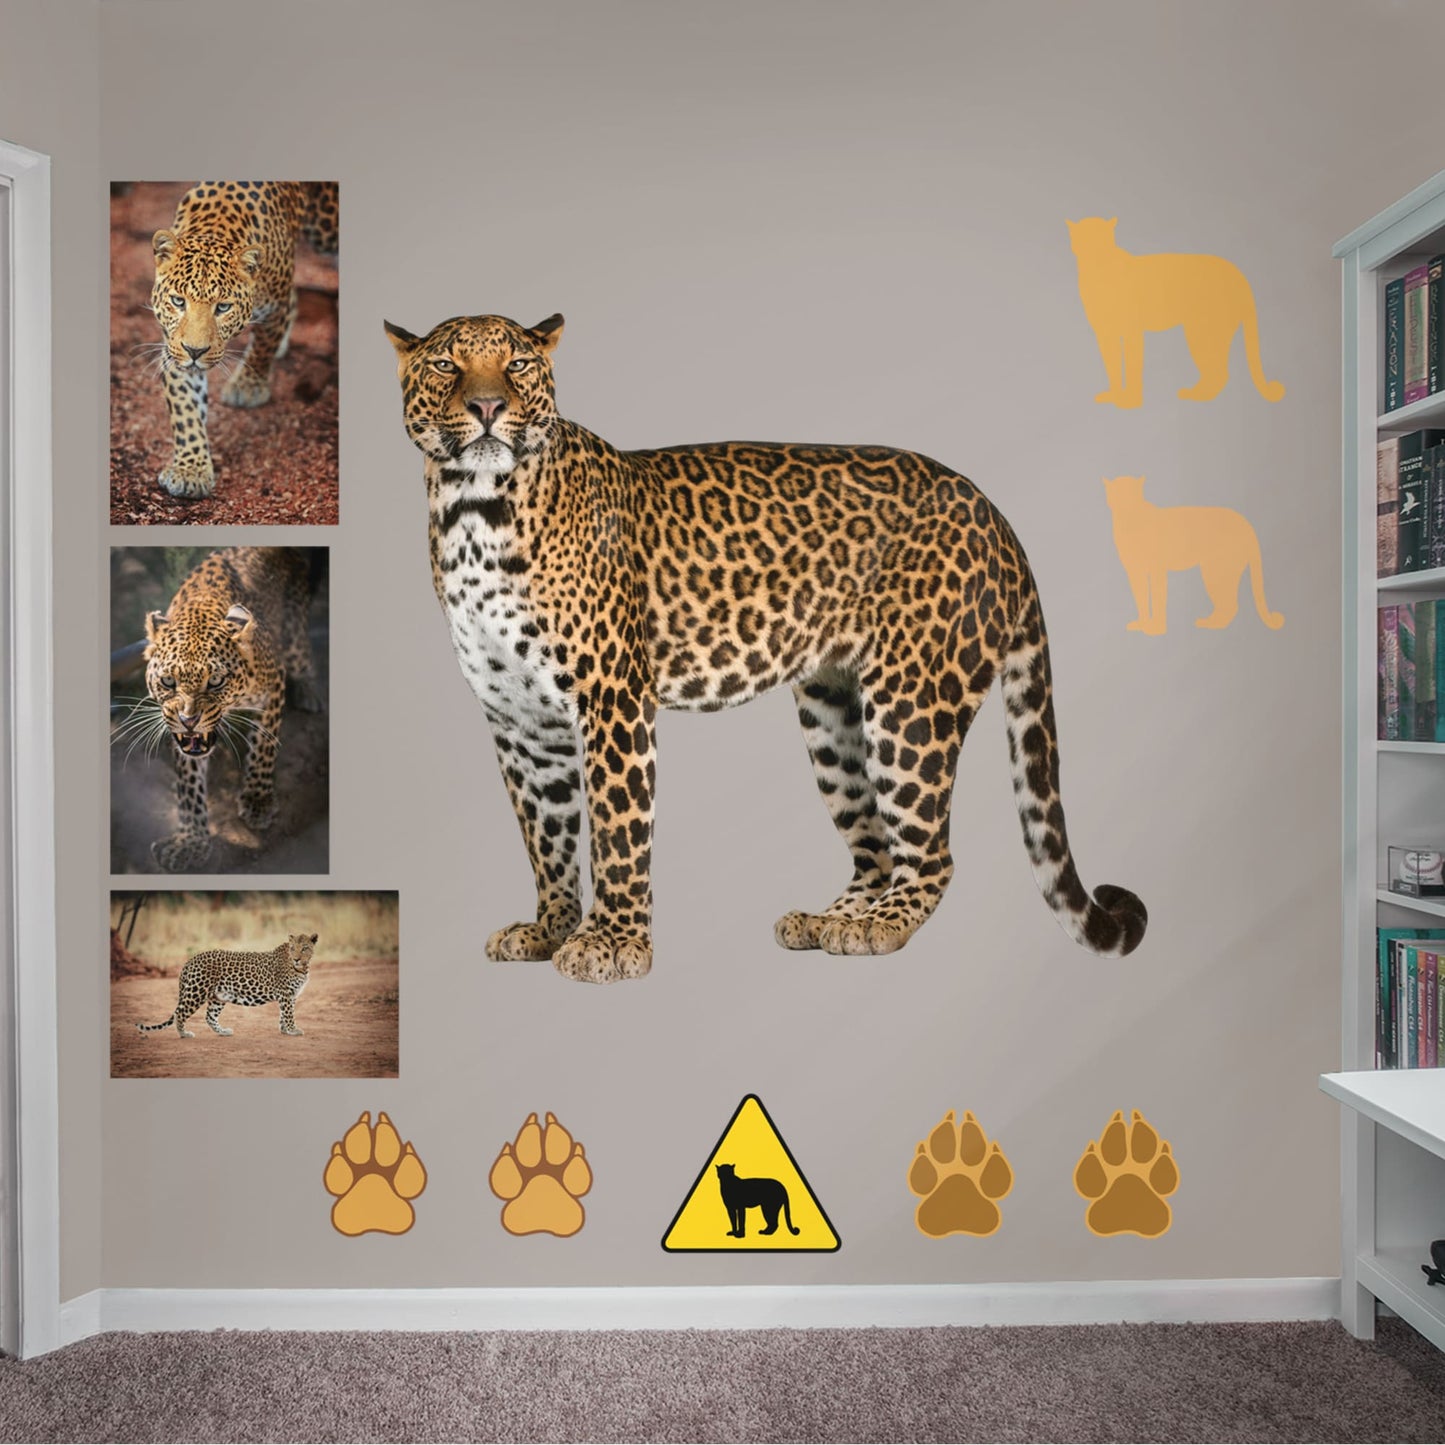 Life-Size Animal + 10 Decals (55"W x 51"H)